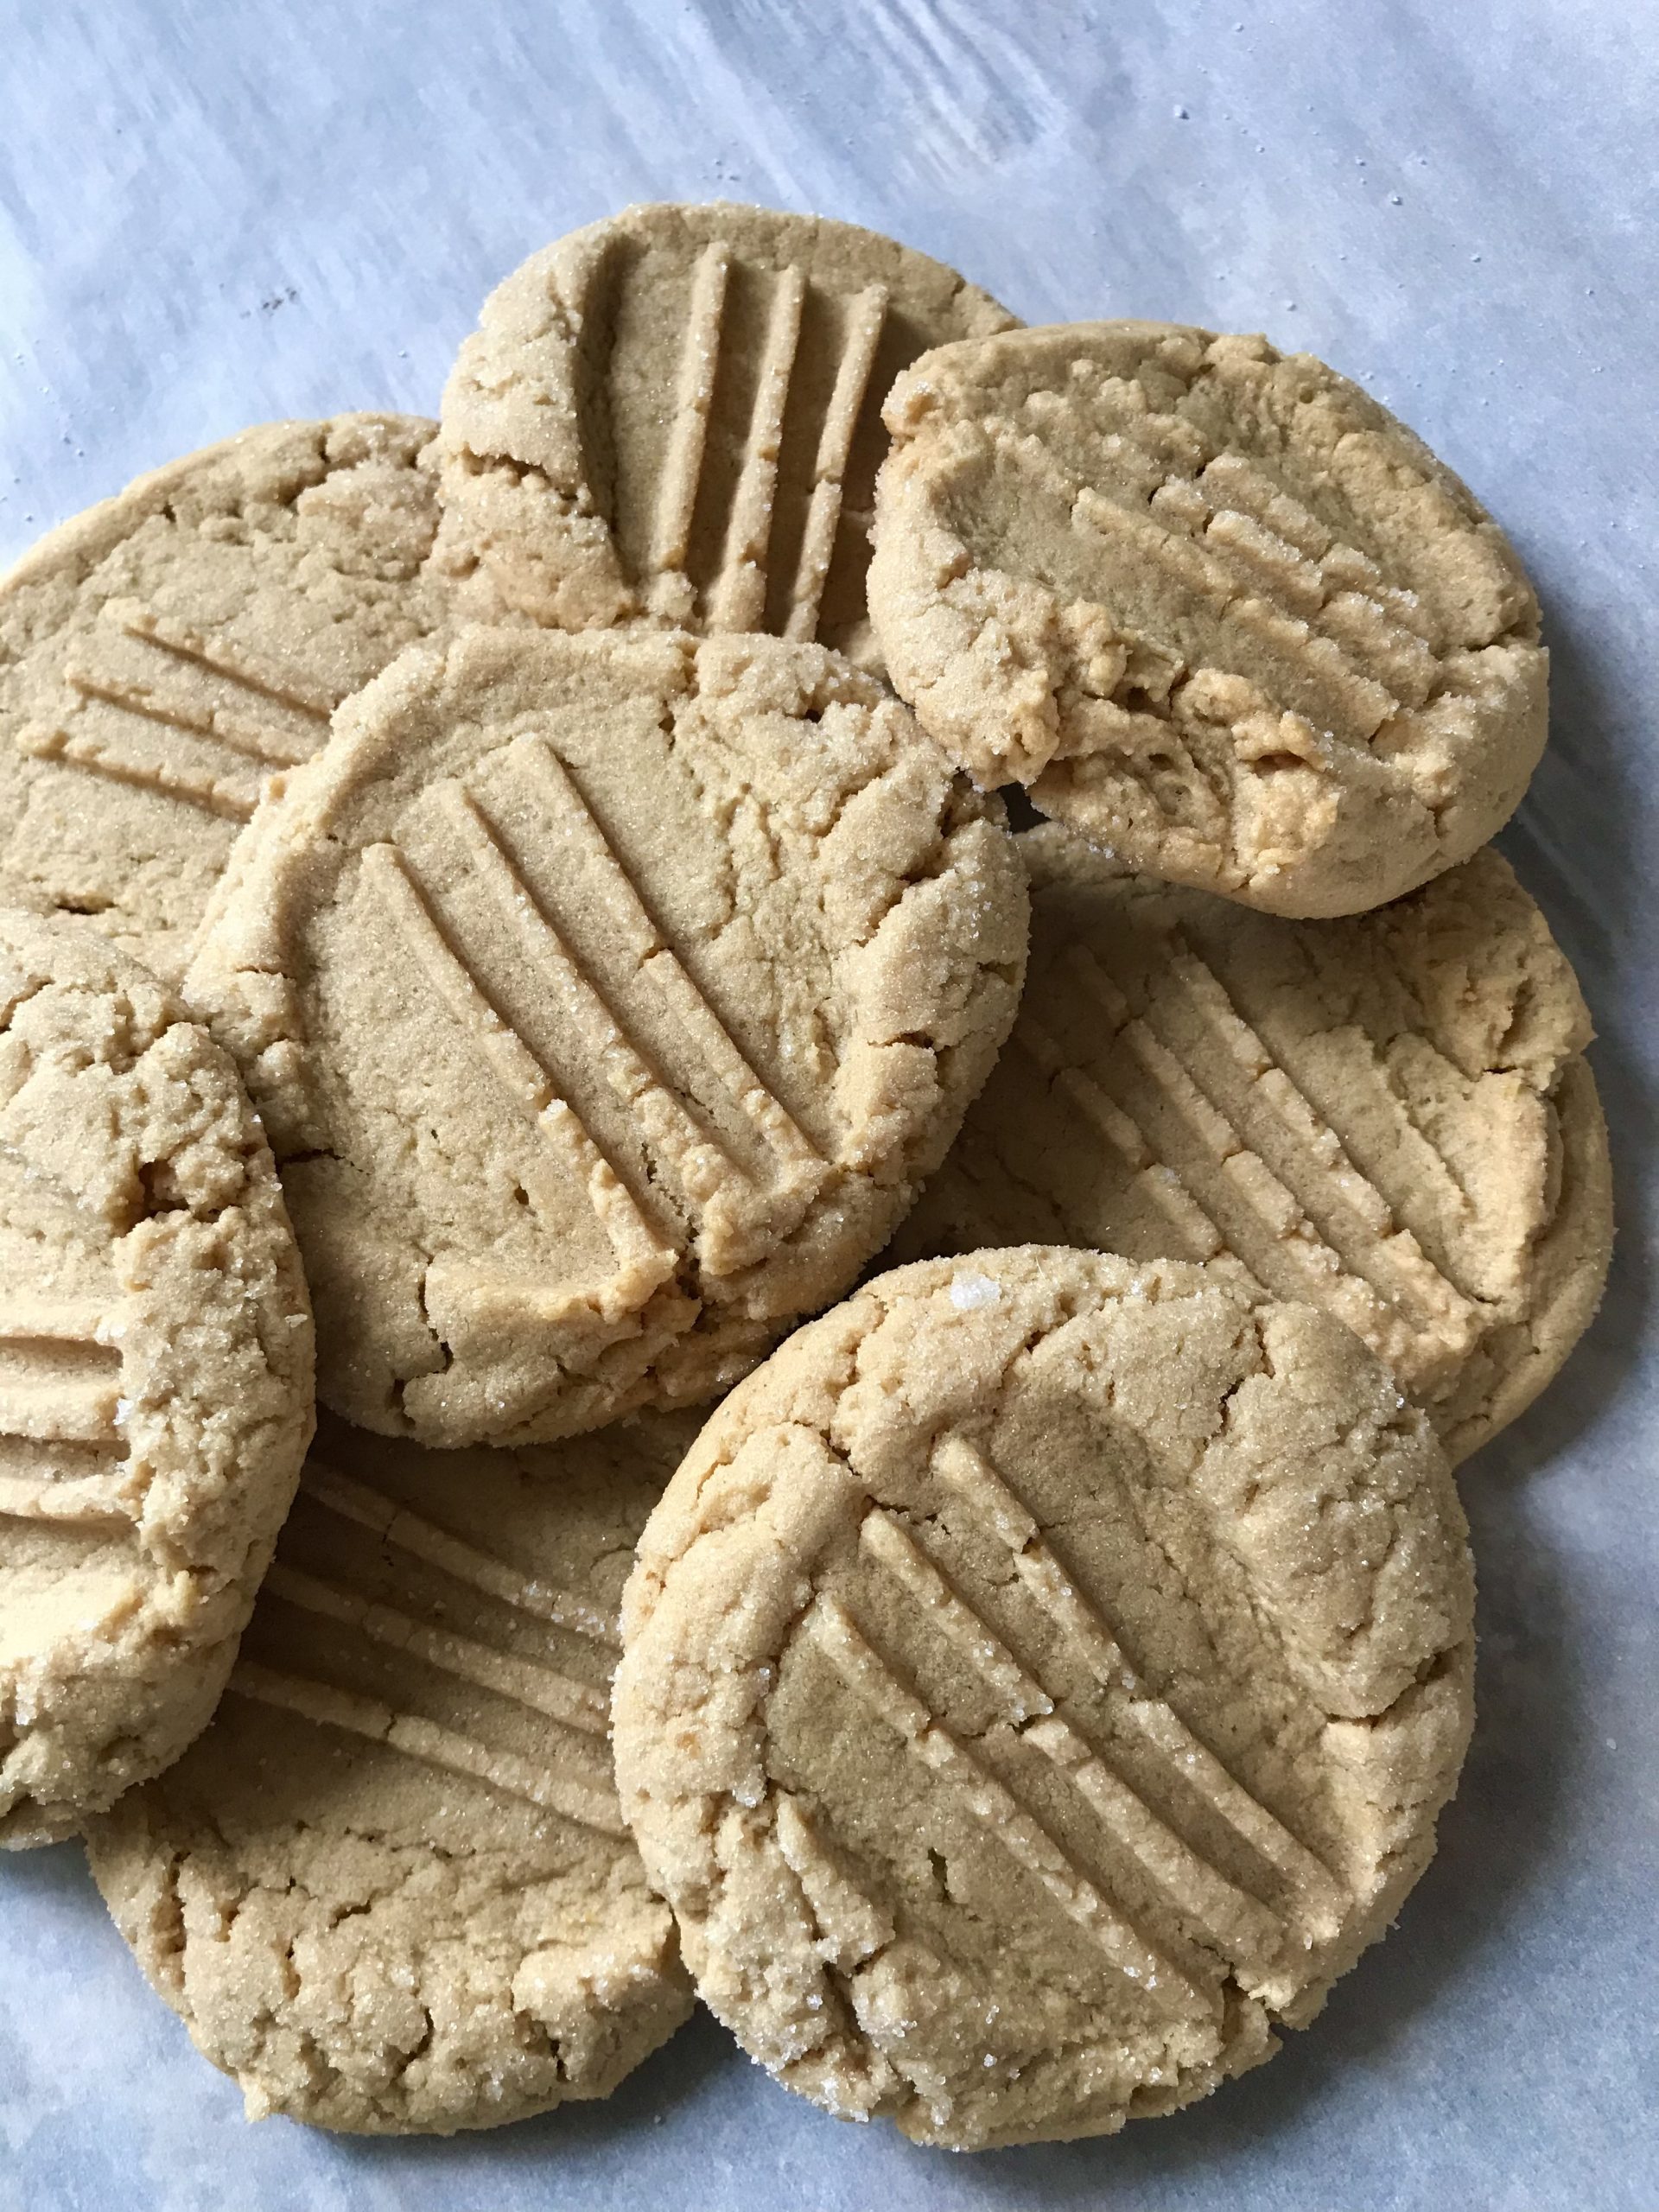 Soft and Creamy Peanut Butter Cookies